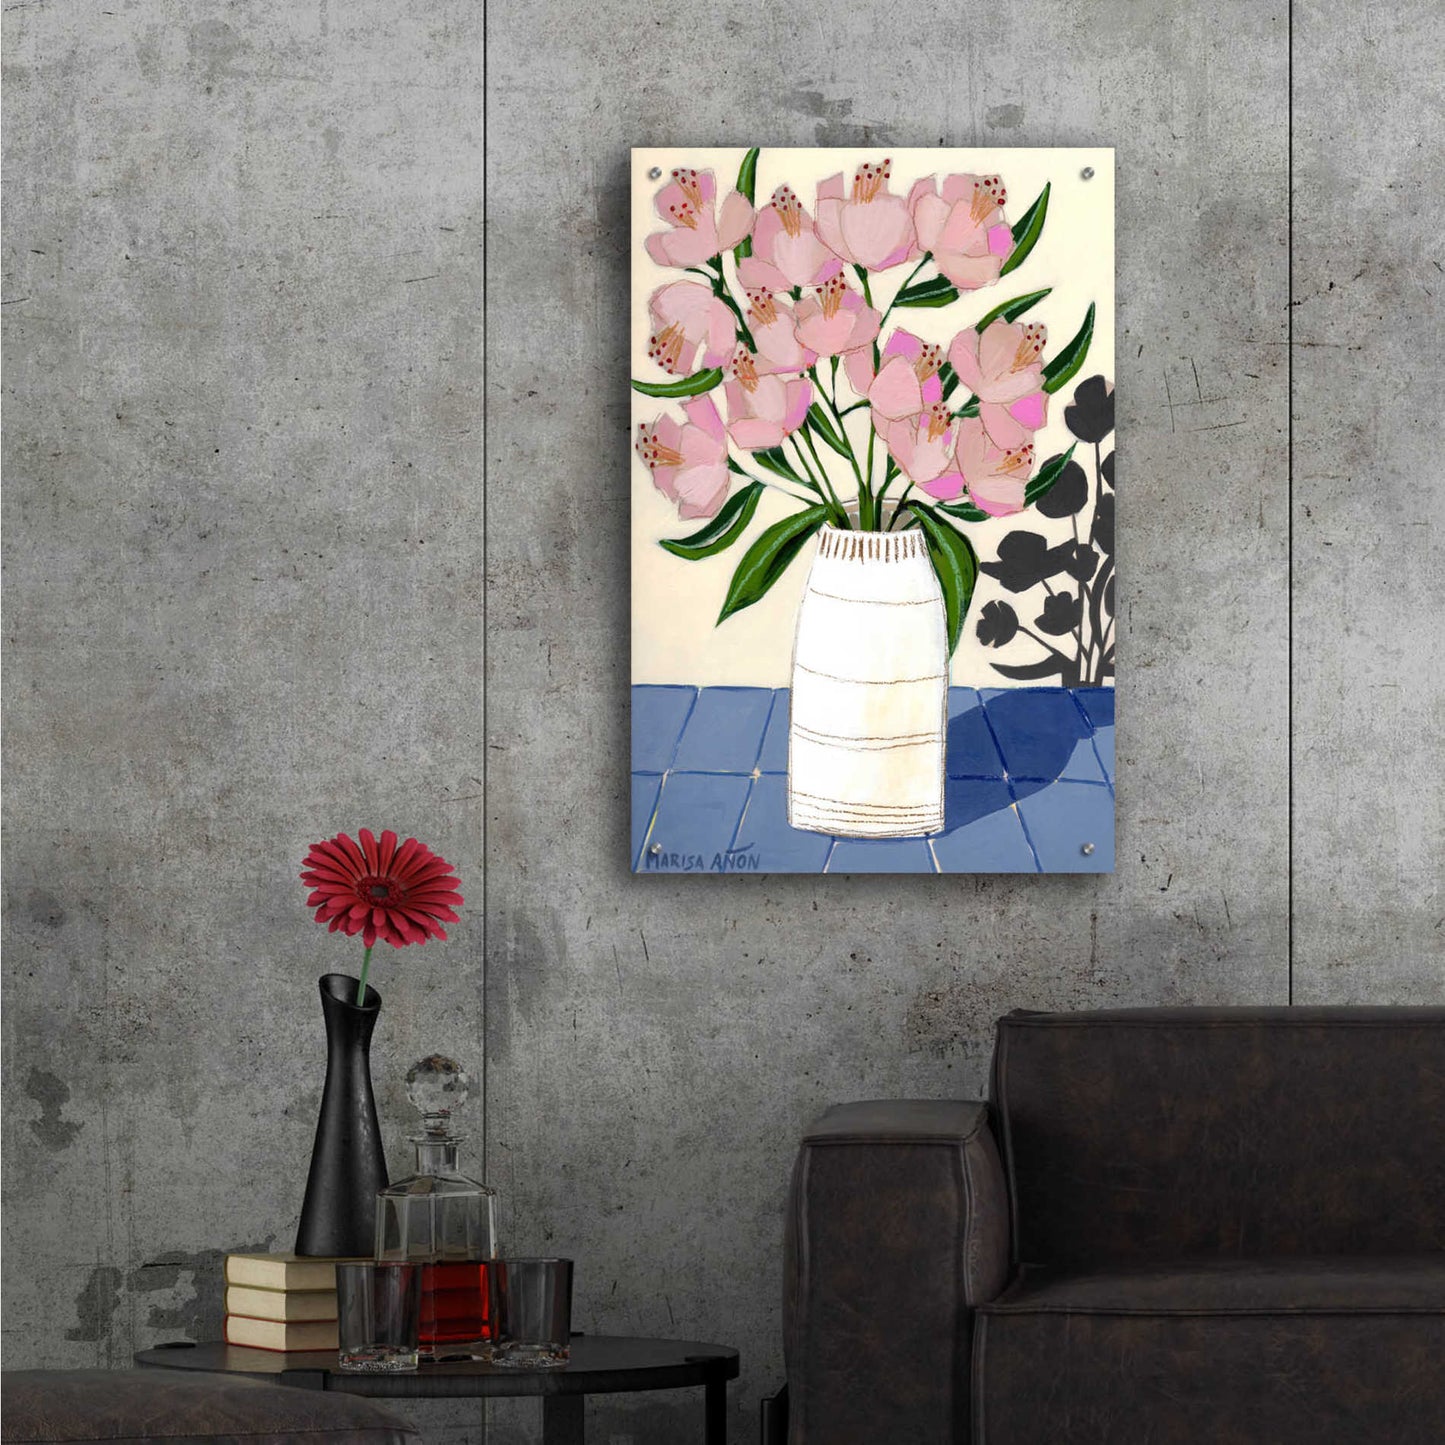 Epic Art 'Spring Florals 5' by Marisa Anon, Acrylic Glass Wall Art,24x36